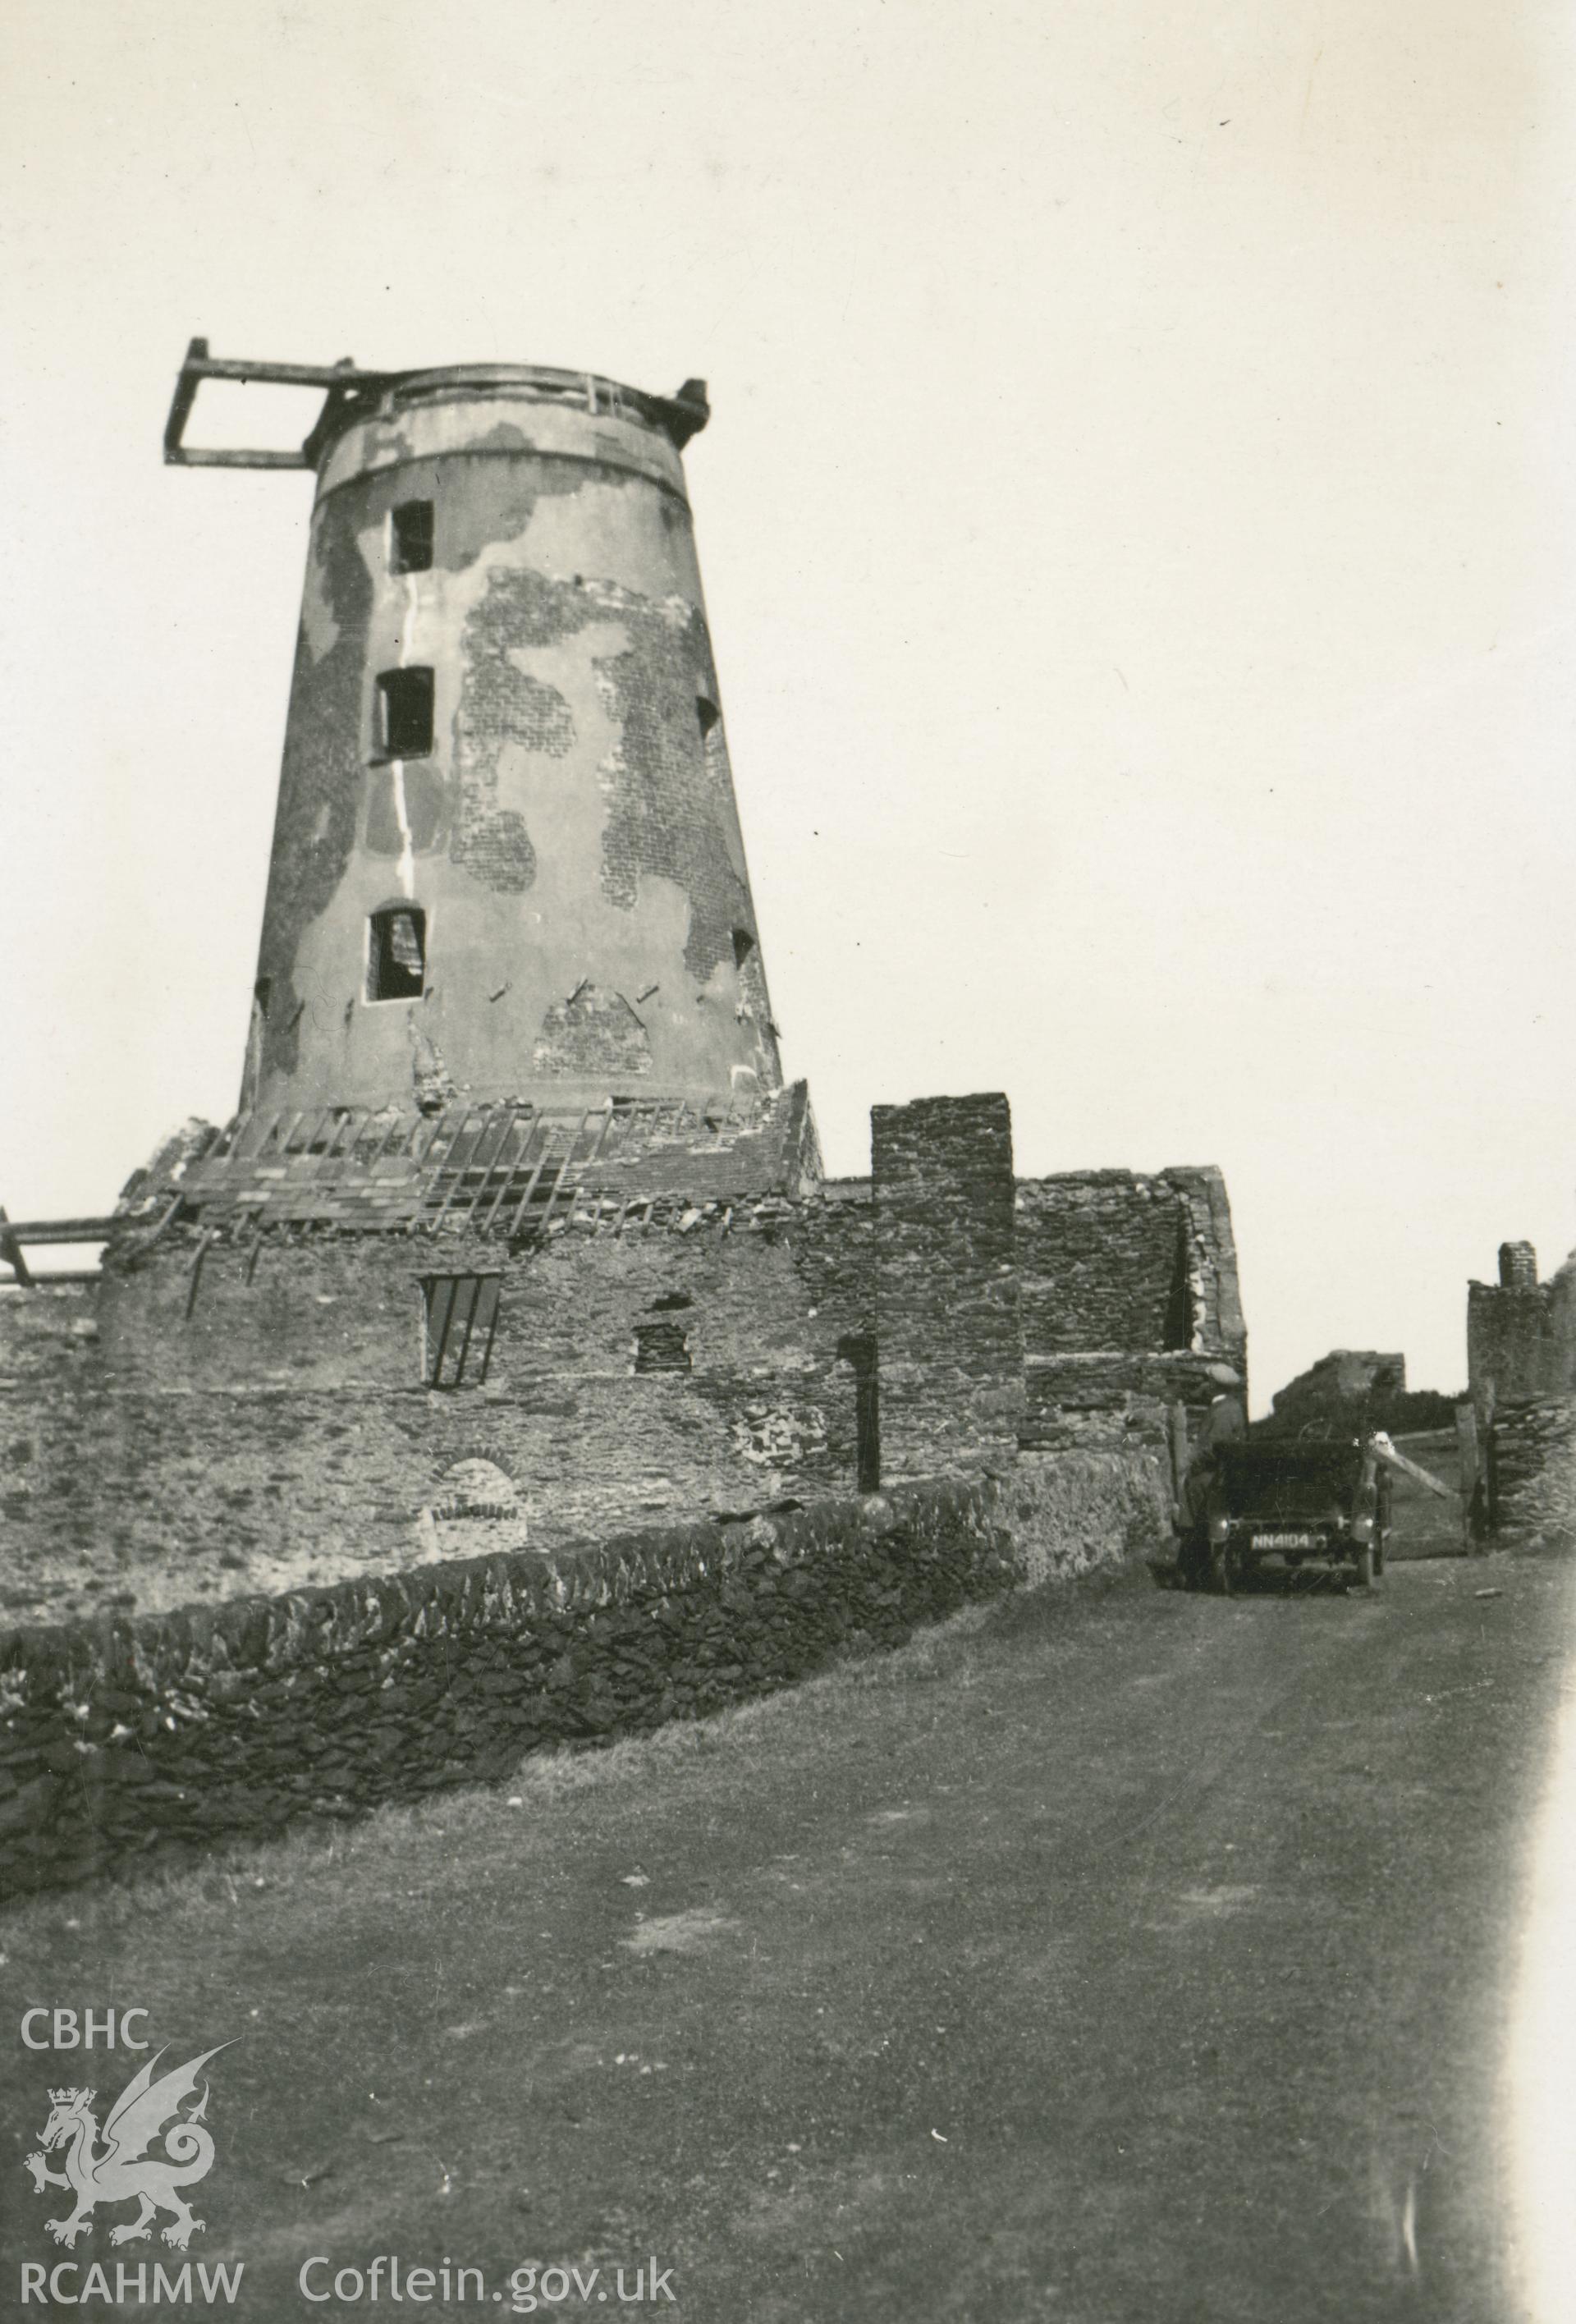 Digital copy of a photo from the Rex Wailes Collection showing a view of Amlwch Windmill.